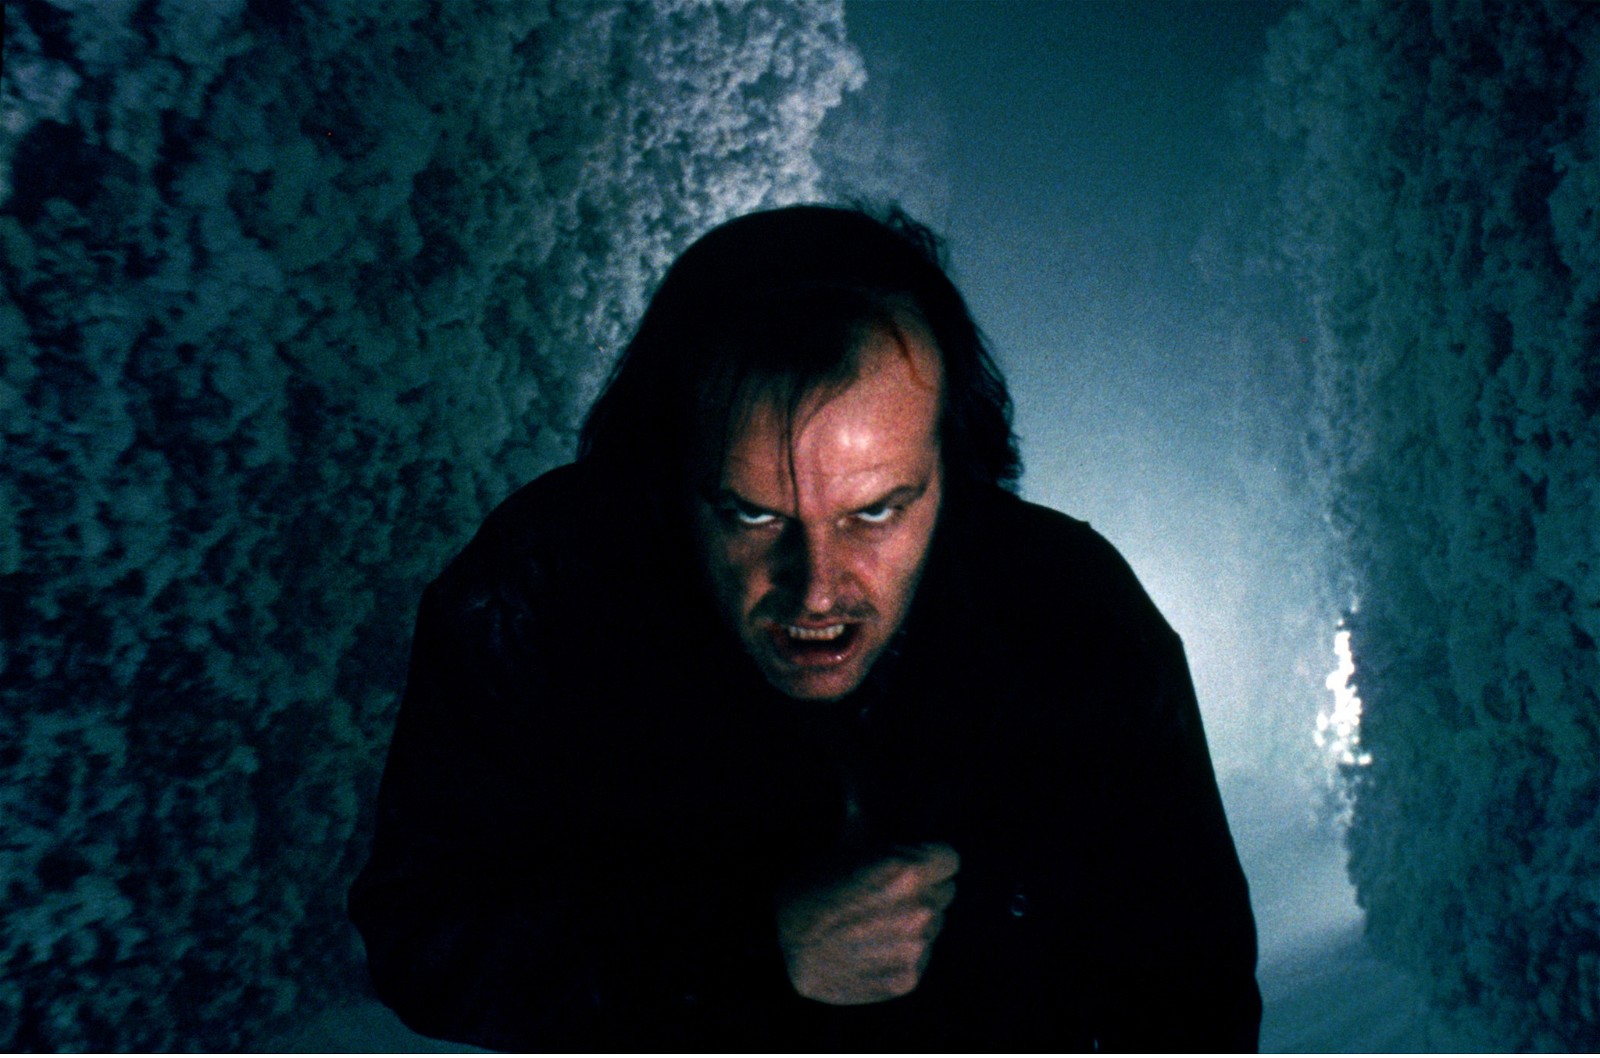 The Shining is one of the best adapted film from Stephen King's works